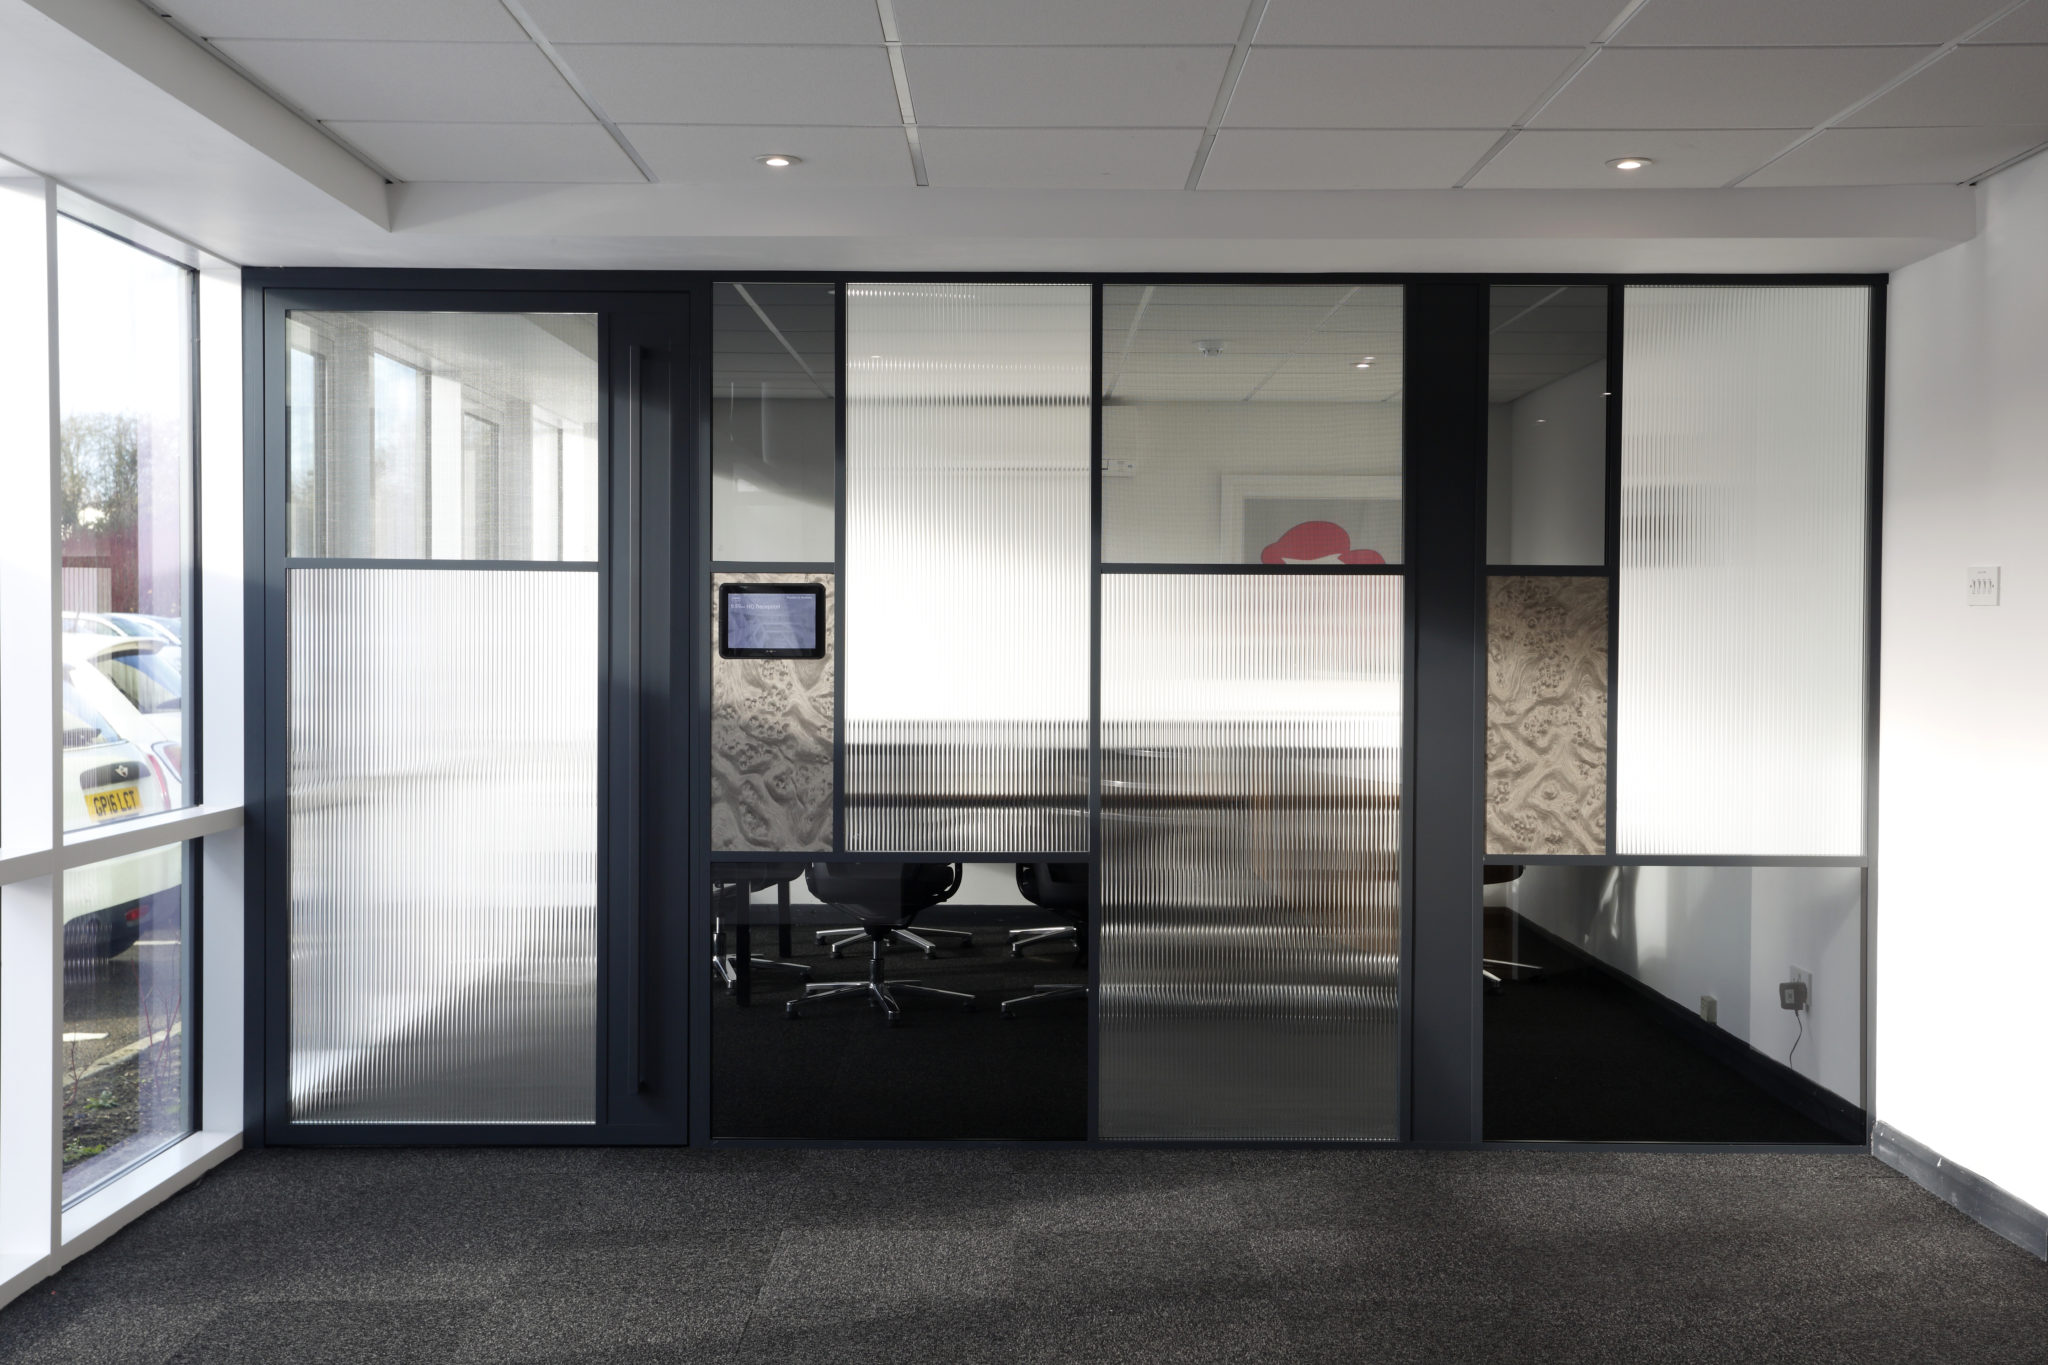 New LOFT54 partitioning system from Planet